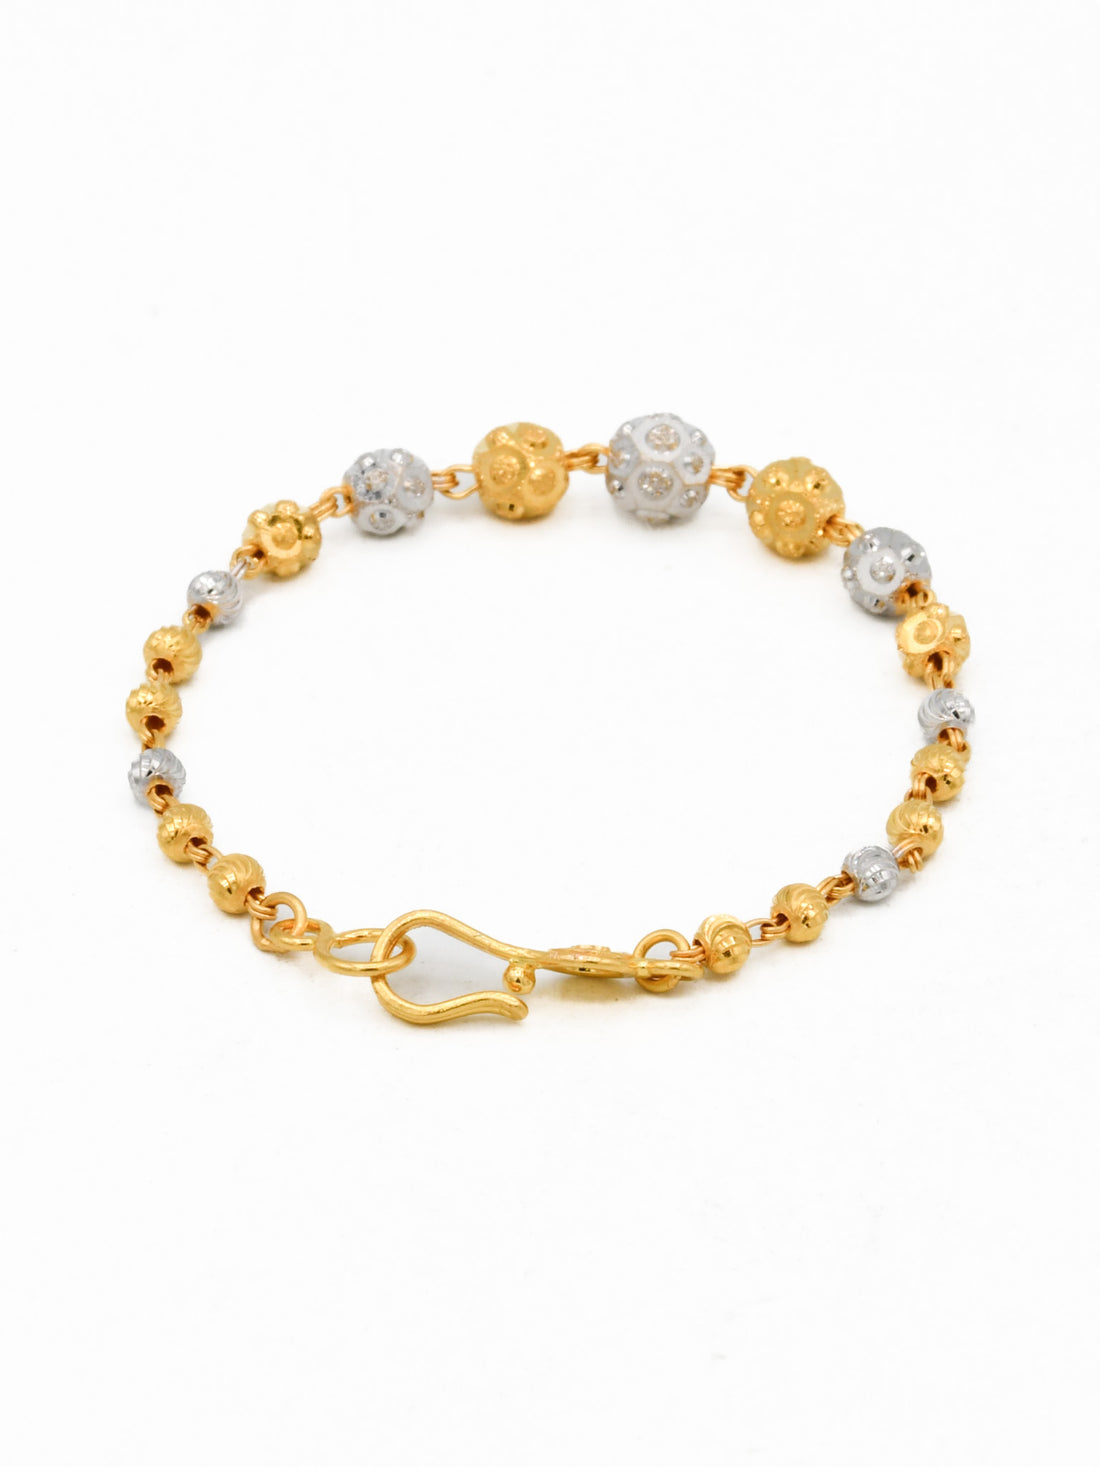 22ct Gold Two Tone Ball 1 Piece Baby Bracelet